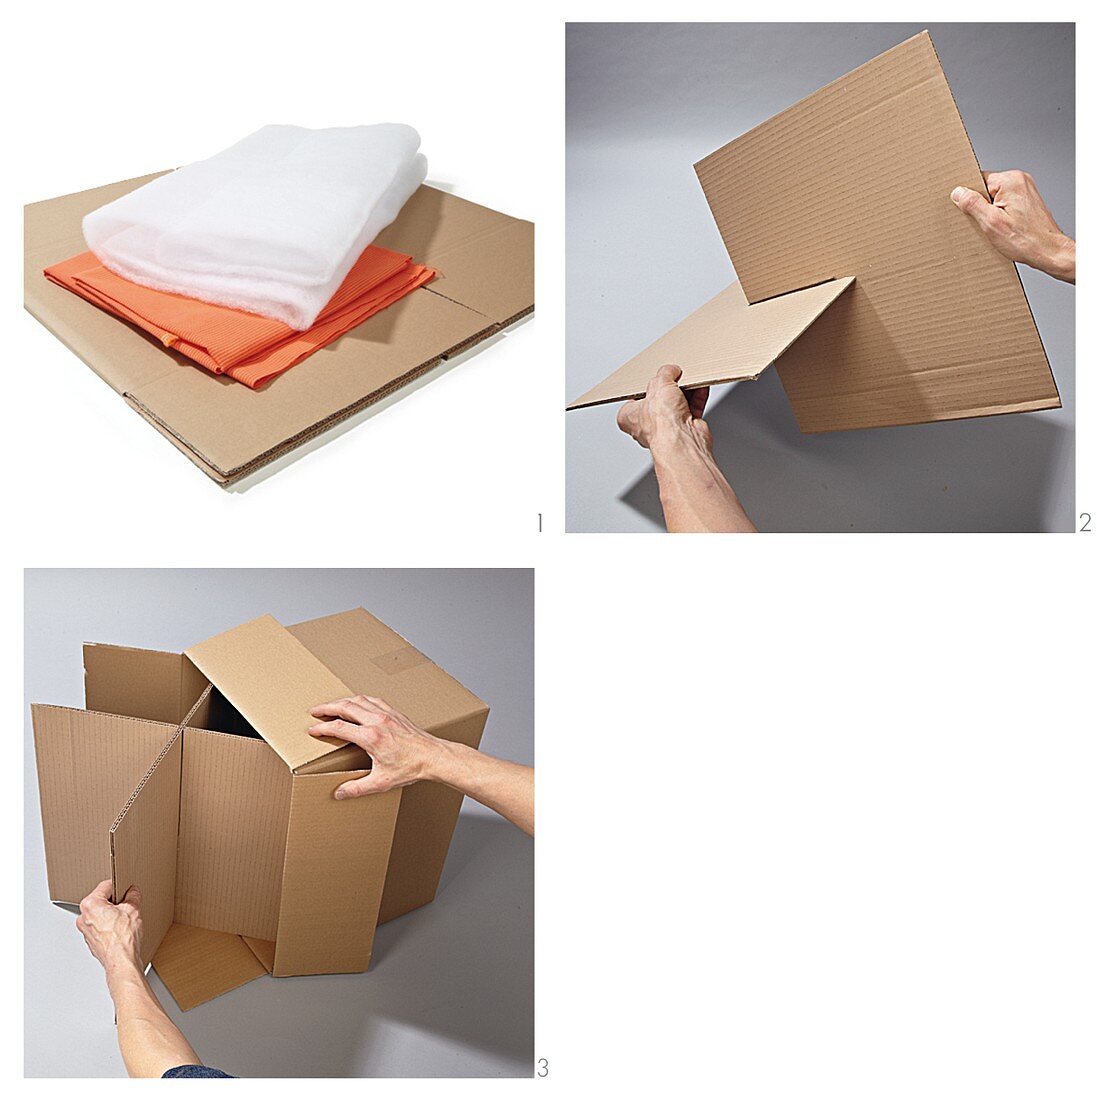 Instructions for making a cardboard stool